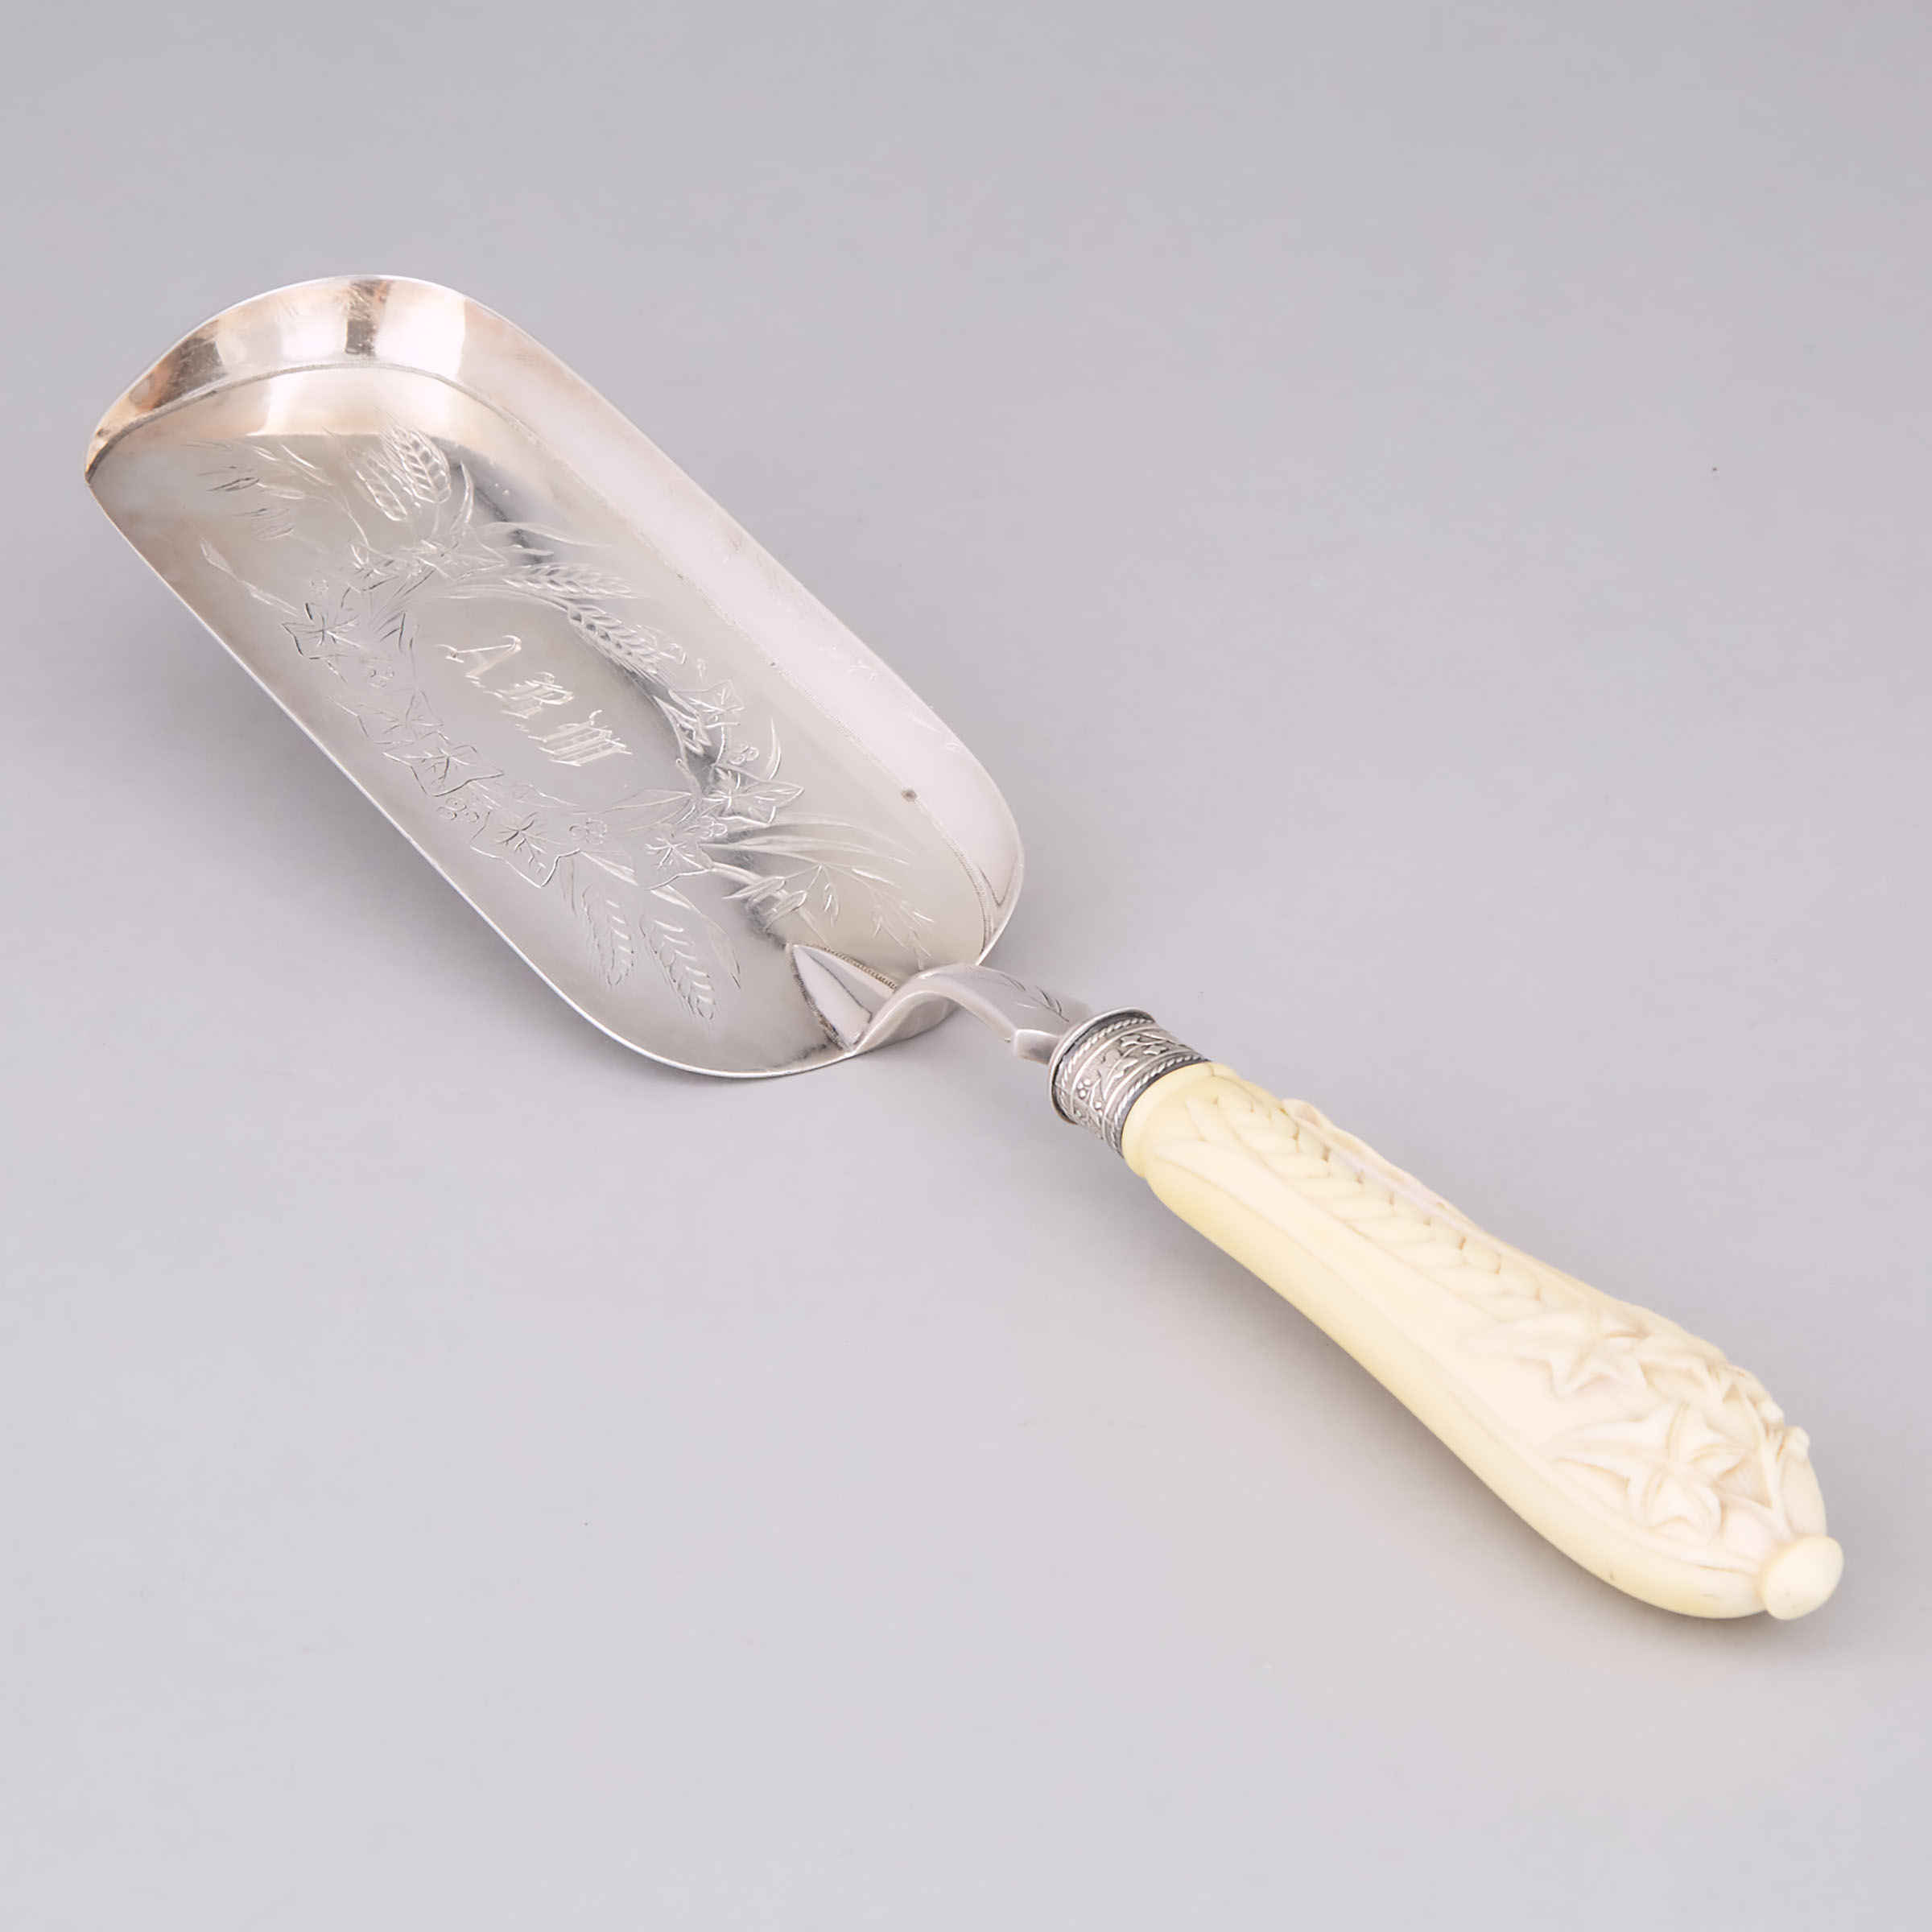 Victorian Silver and Carved Ivory Crumb Scoop, William Hutton & Sons, London, 1883